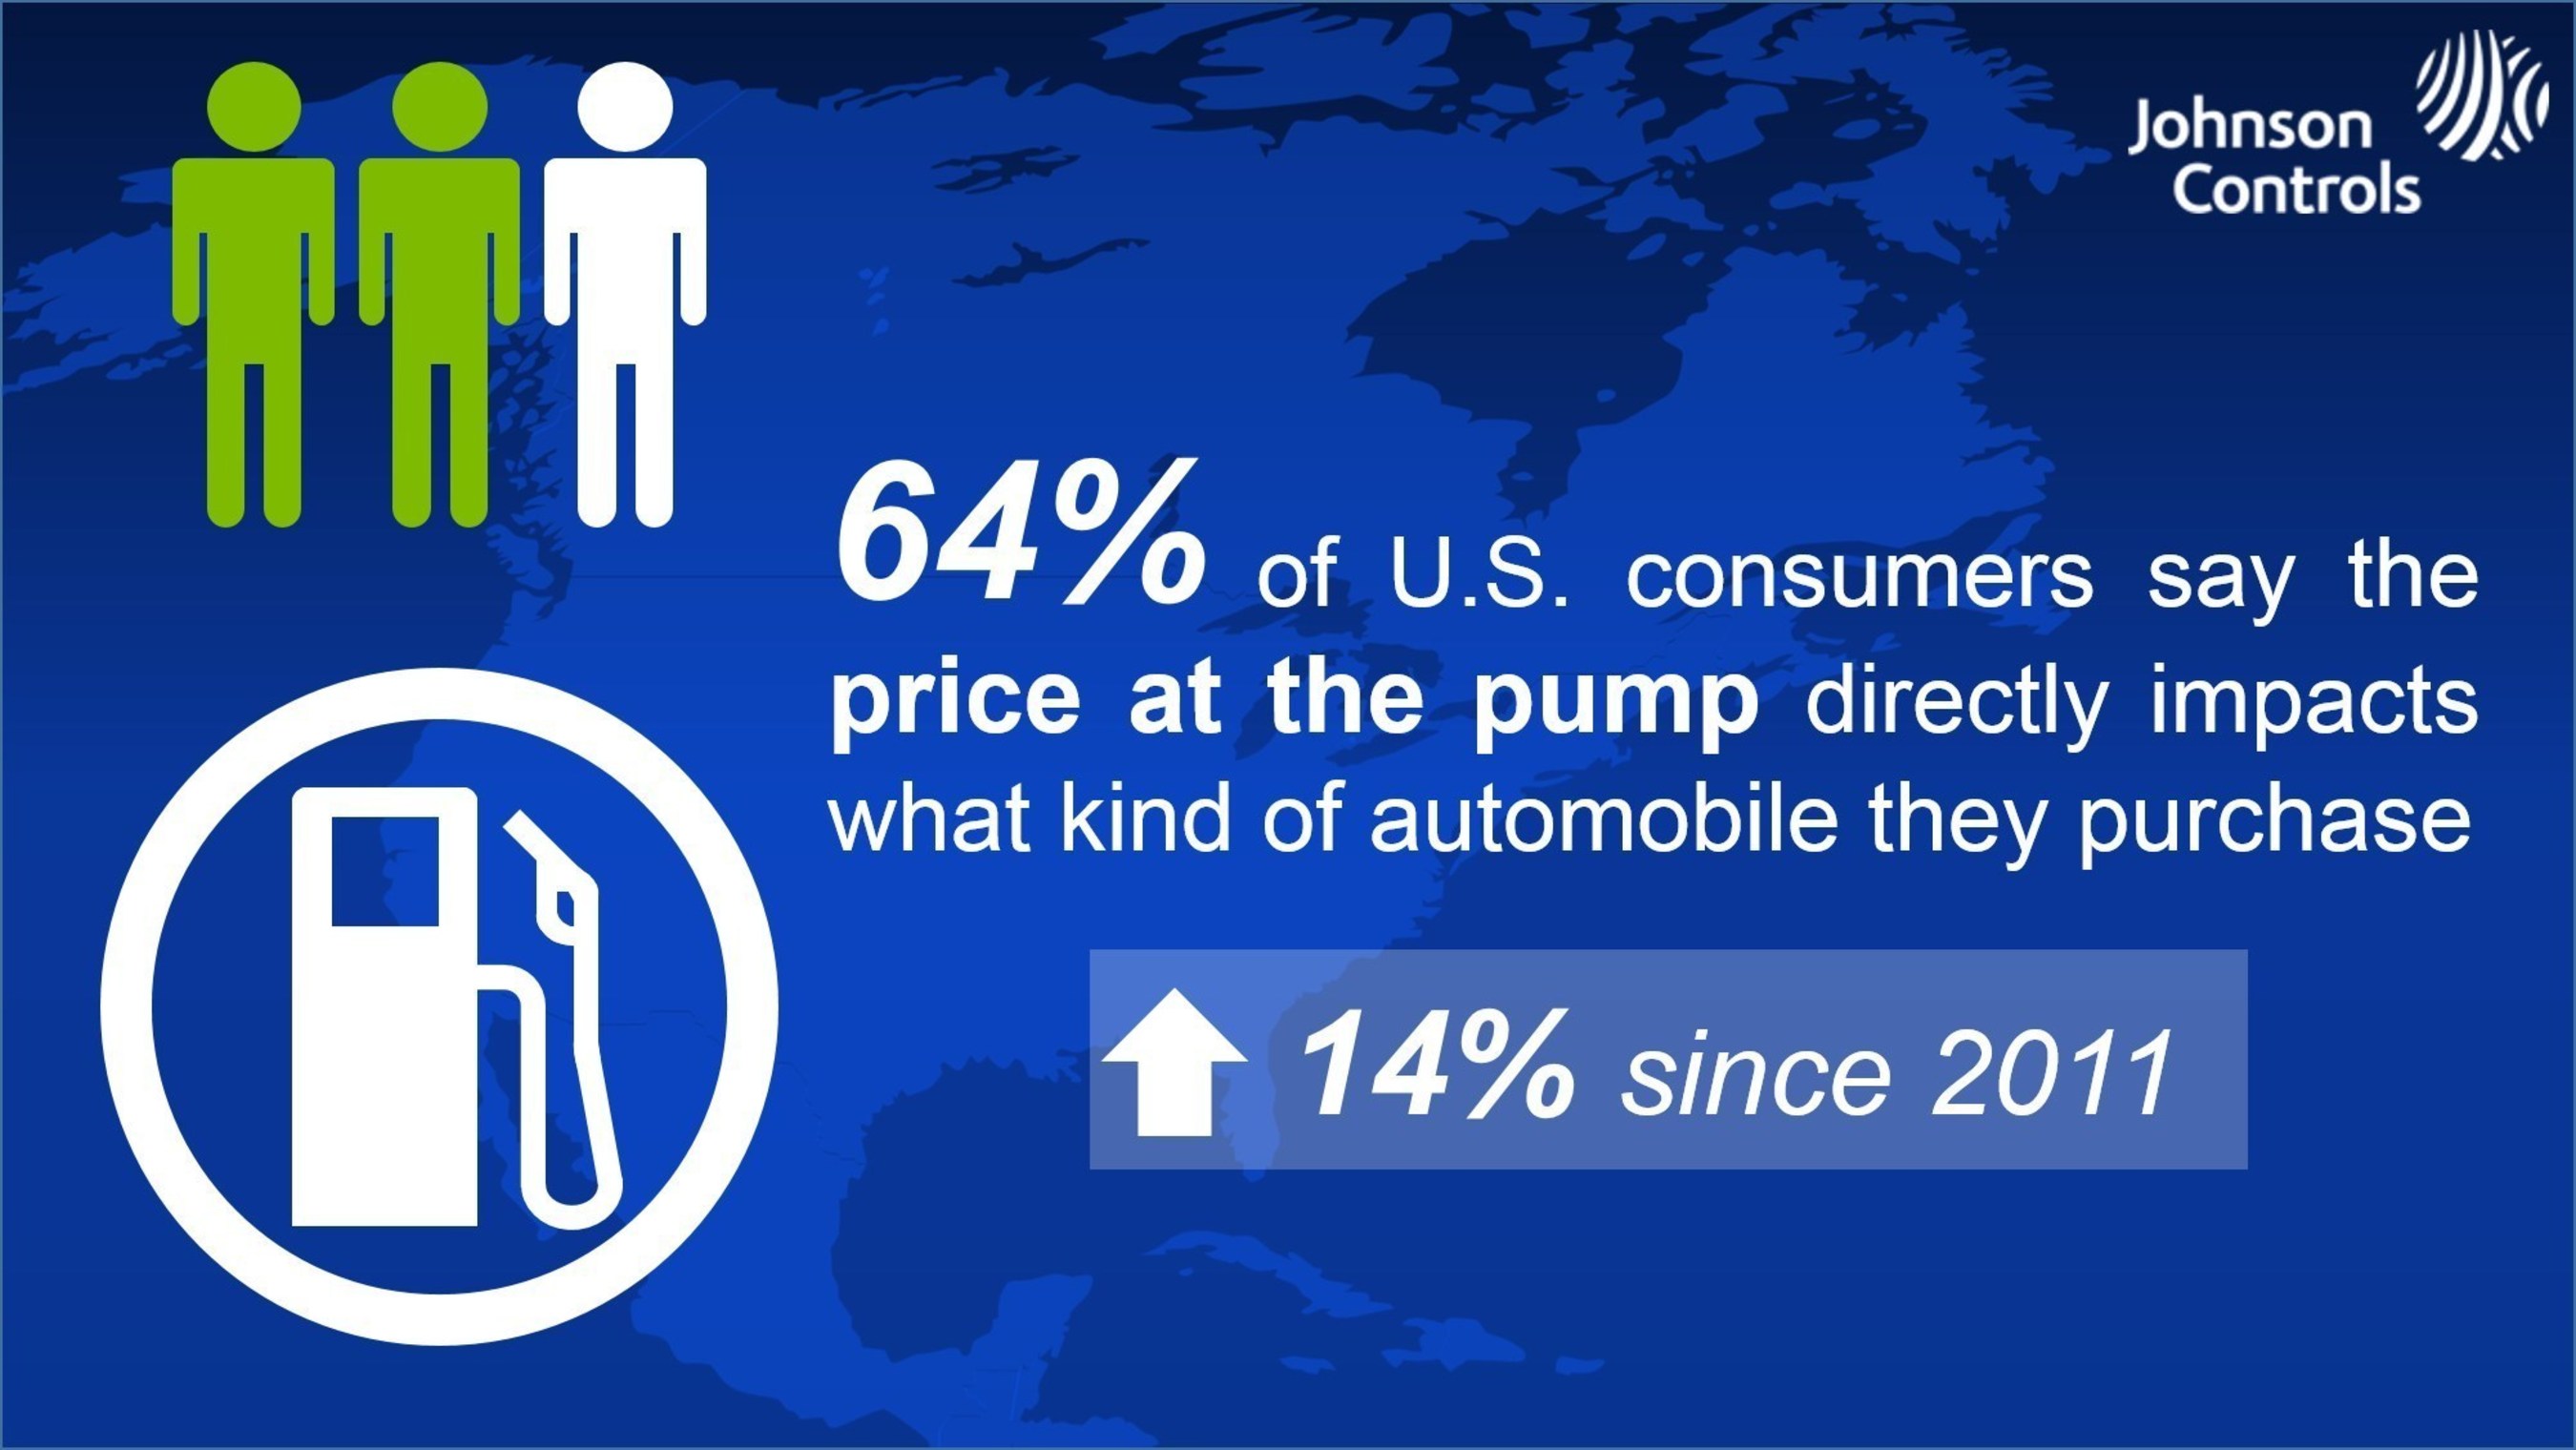 Sixty-four percent of U.S. consumers say the price at the gas pump directly impacts what kind of automobile they purchase, according to a survey conducted by the Opinion Research Corporation on behalf of Johnson Controls.